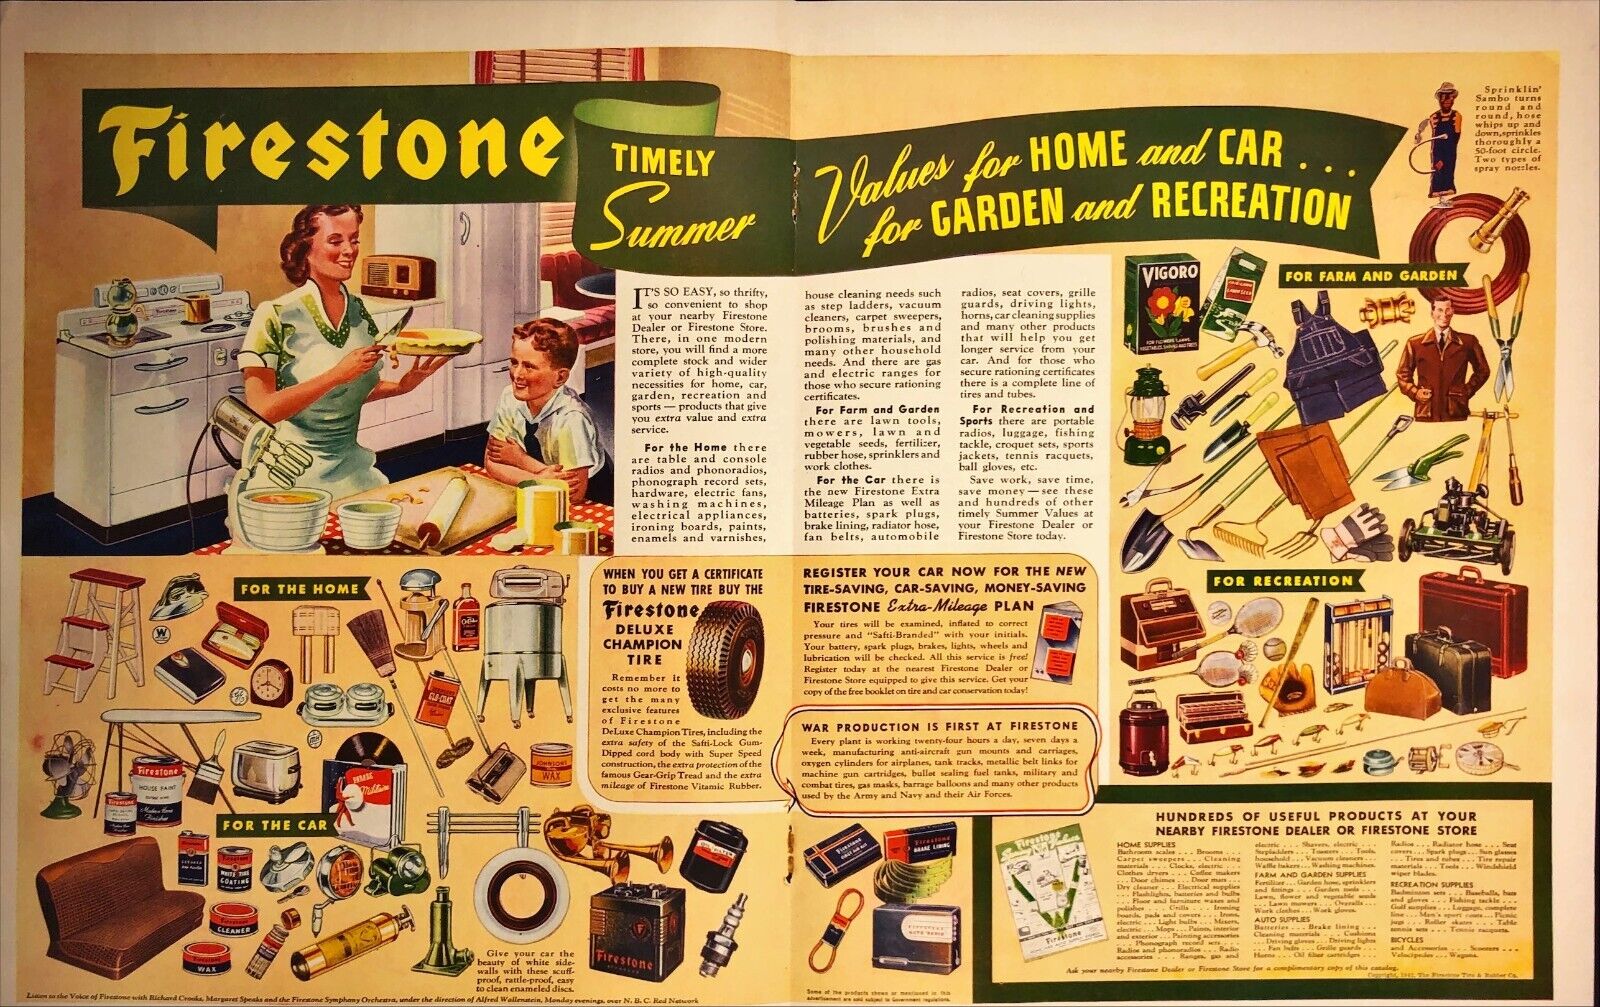 1942 Firestone Store Summer Values for Home and Car Vintage 2 Page Print Ad